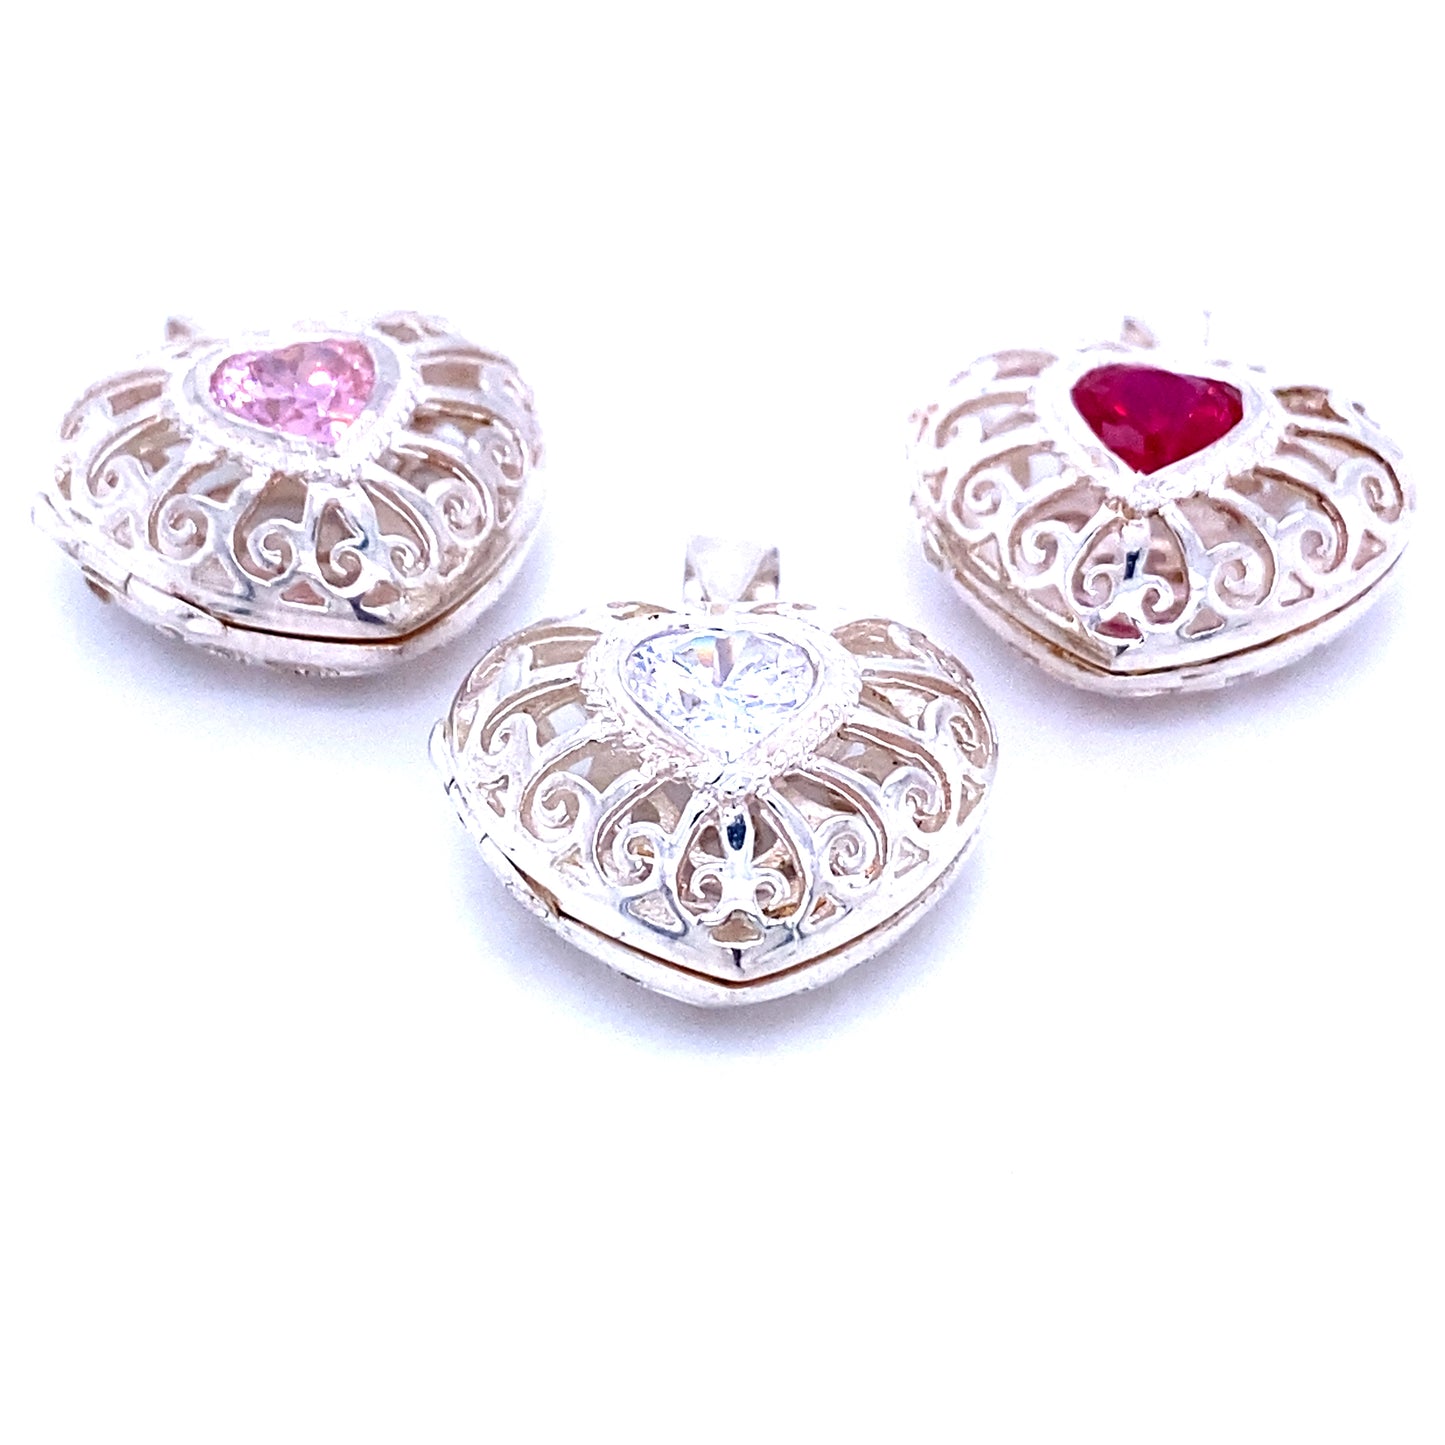 Three Super Silver heart cage lockets with cubic zirconia stones featuring a filigree design.